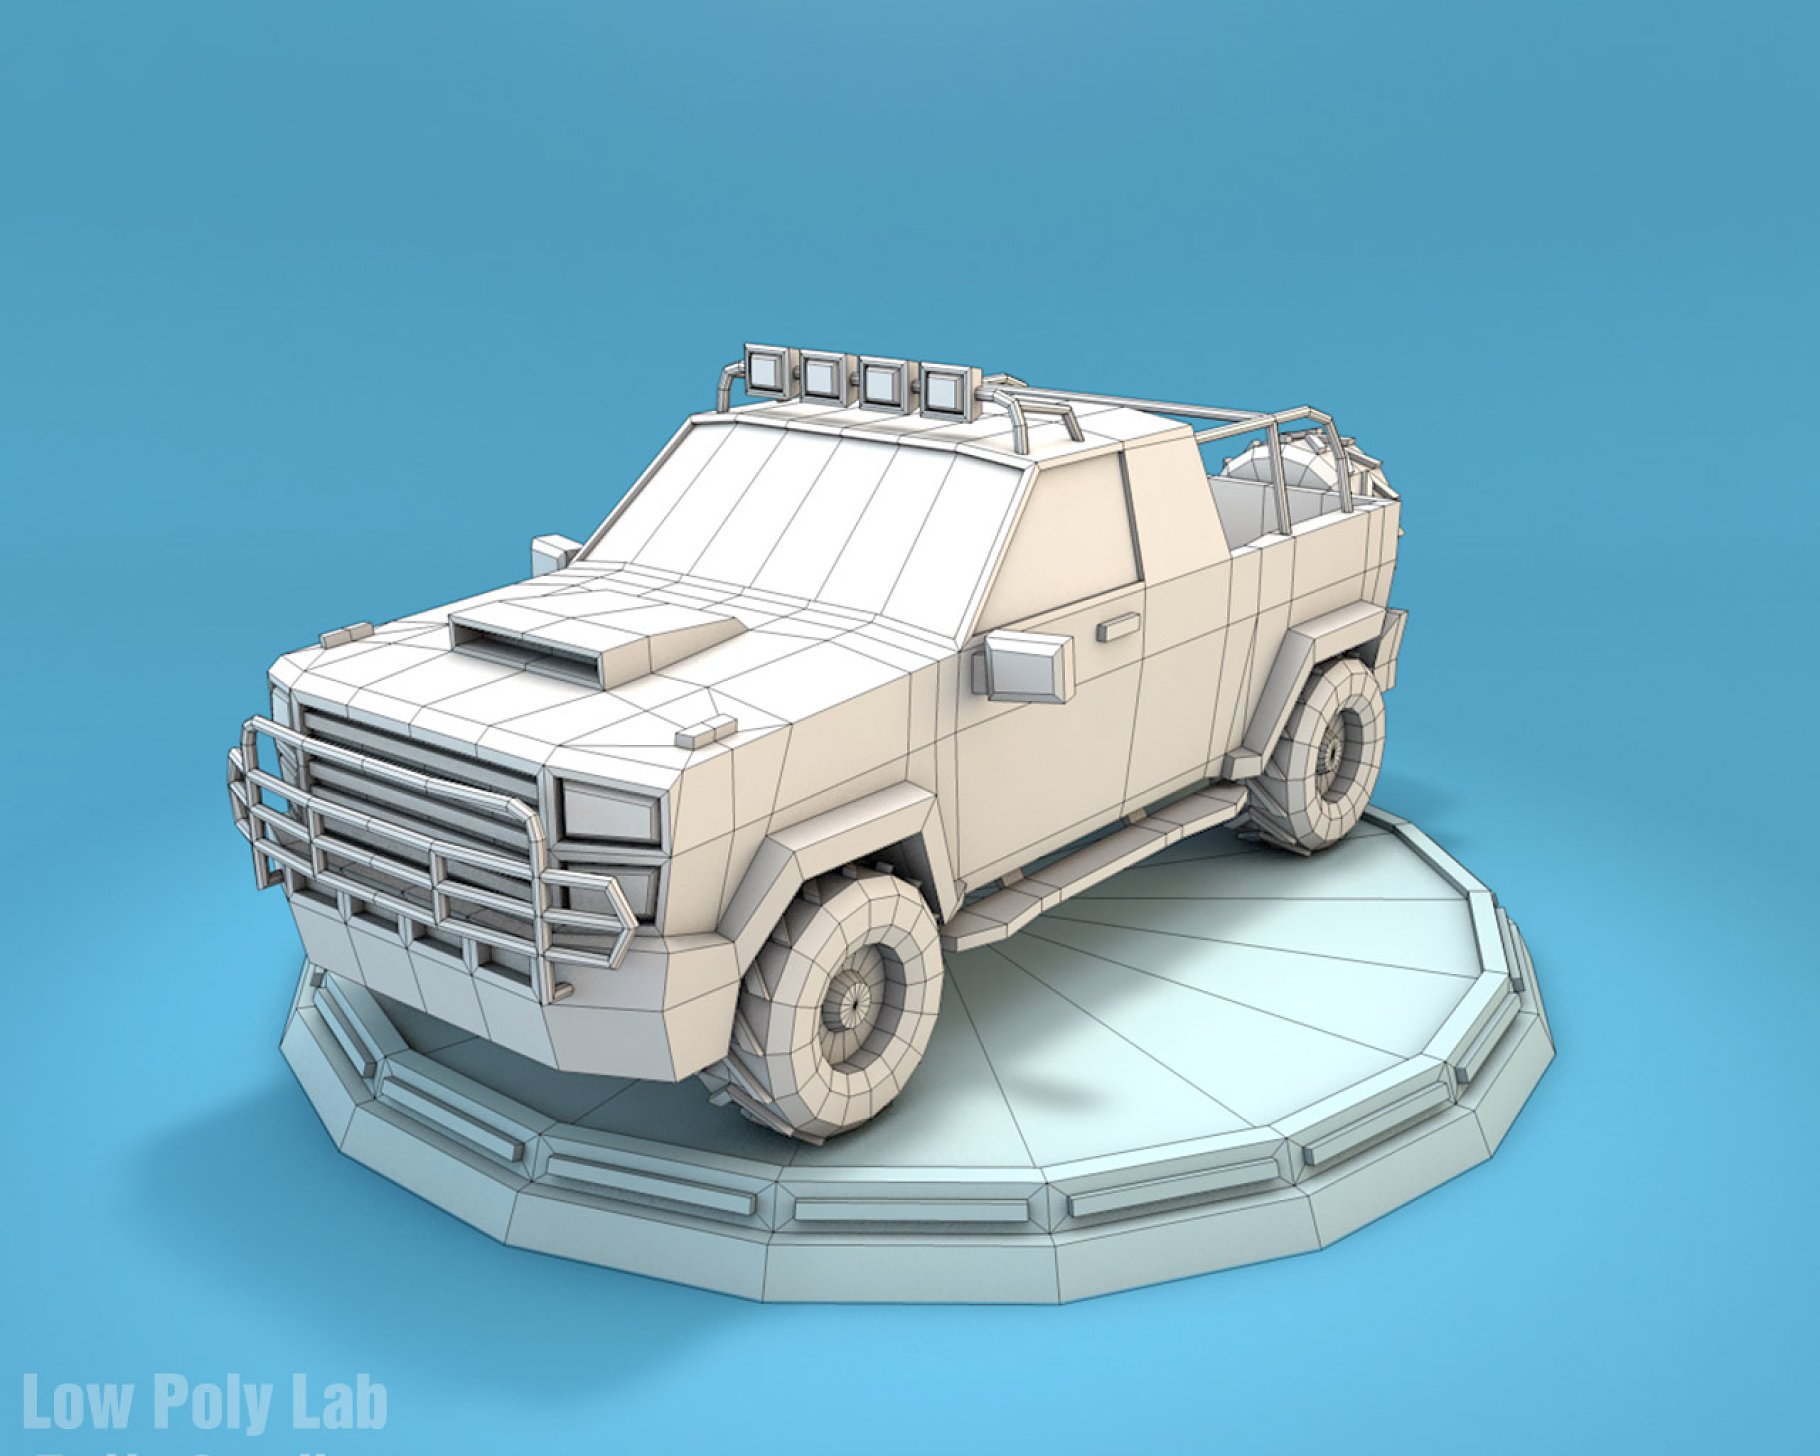 Graphic low poly jeep front mockup on a blue background.